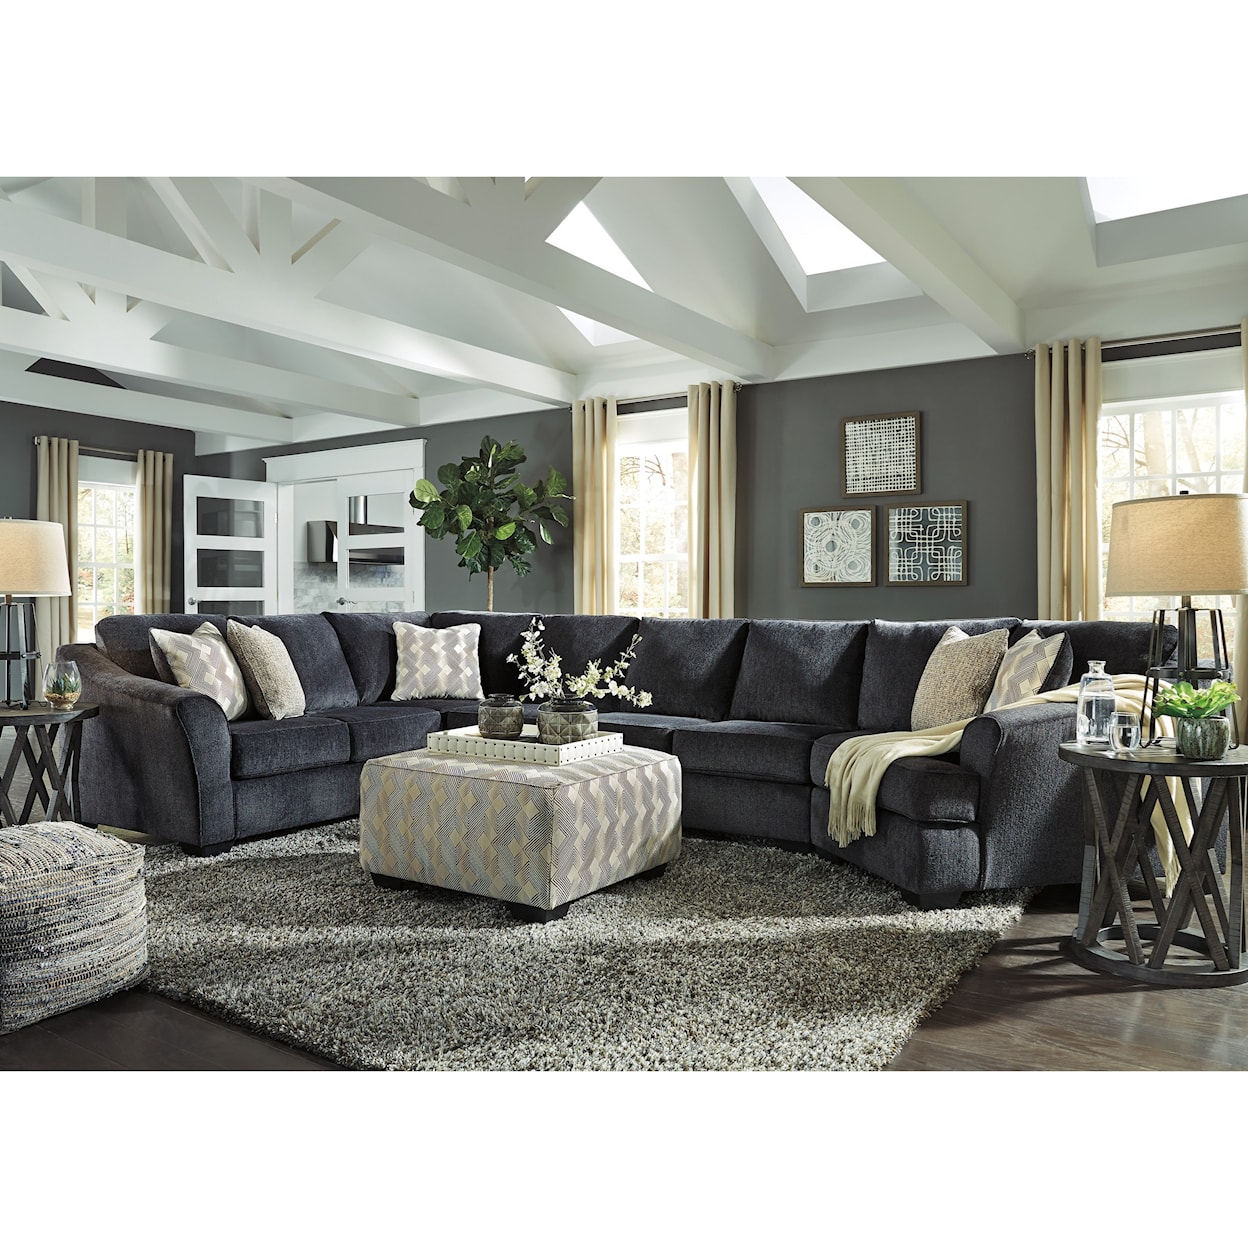 Signature Design by Ashley Eltmann 4pc Sectional and ottoman